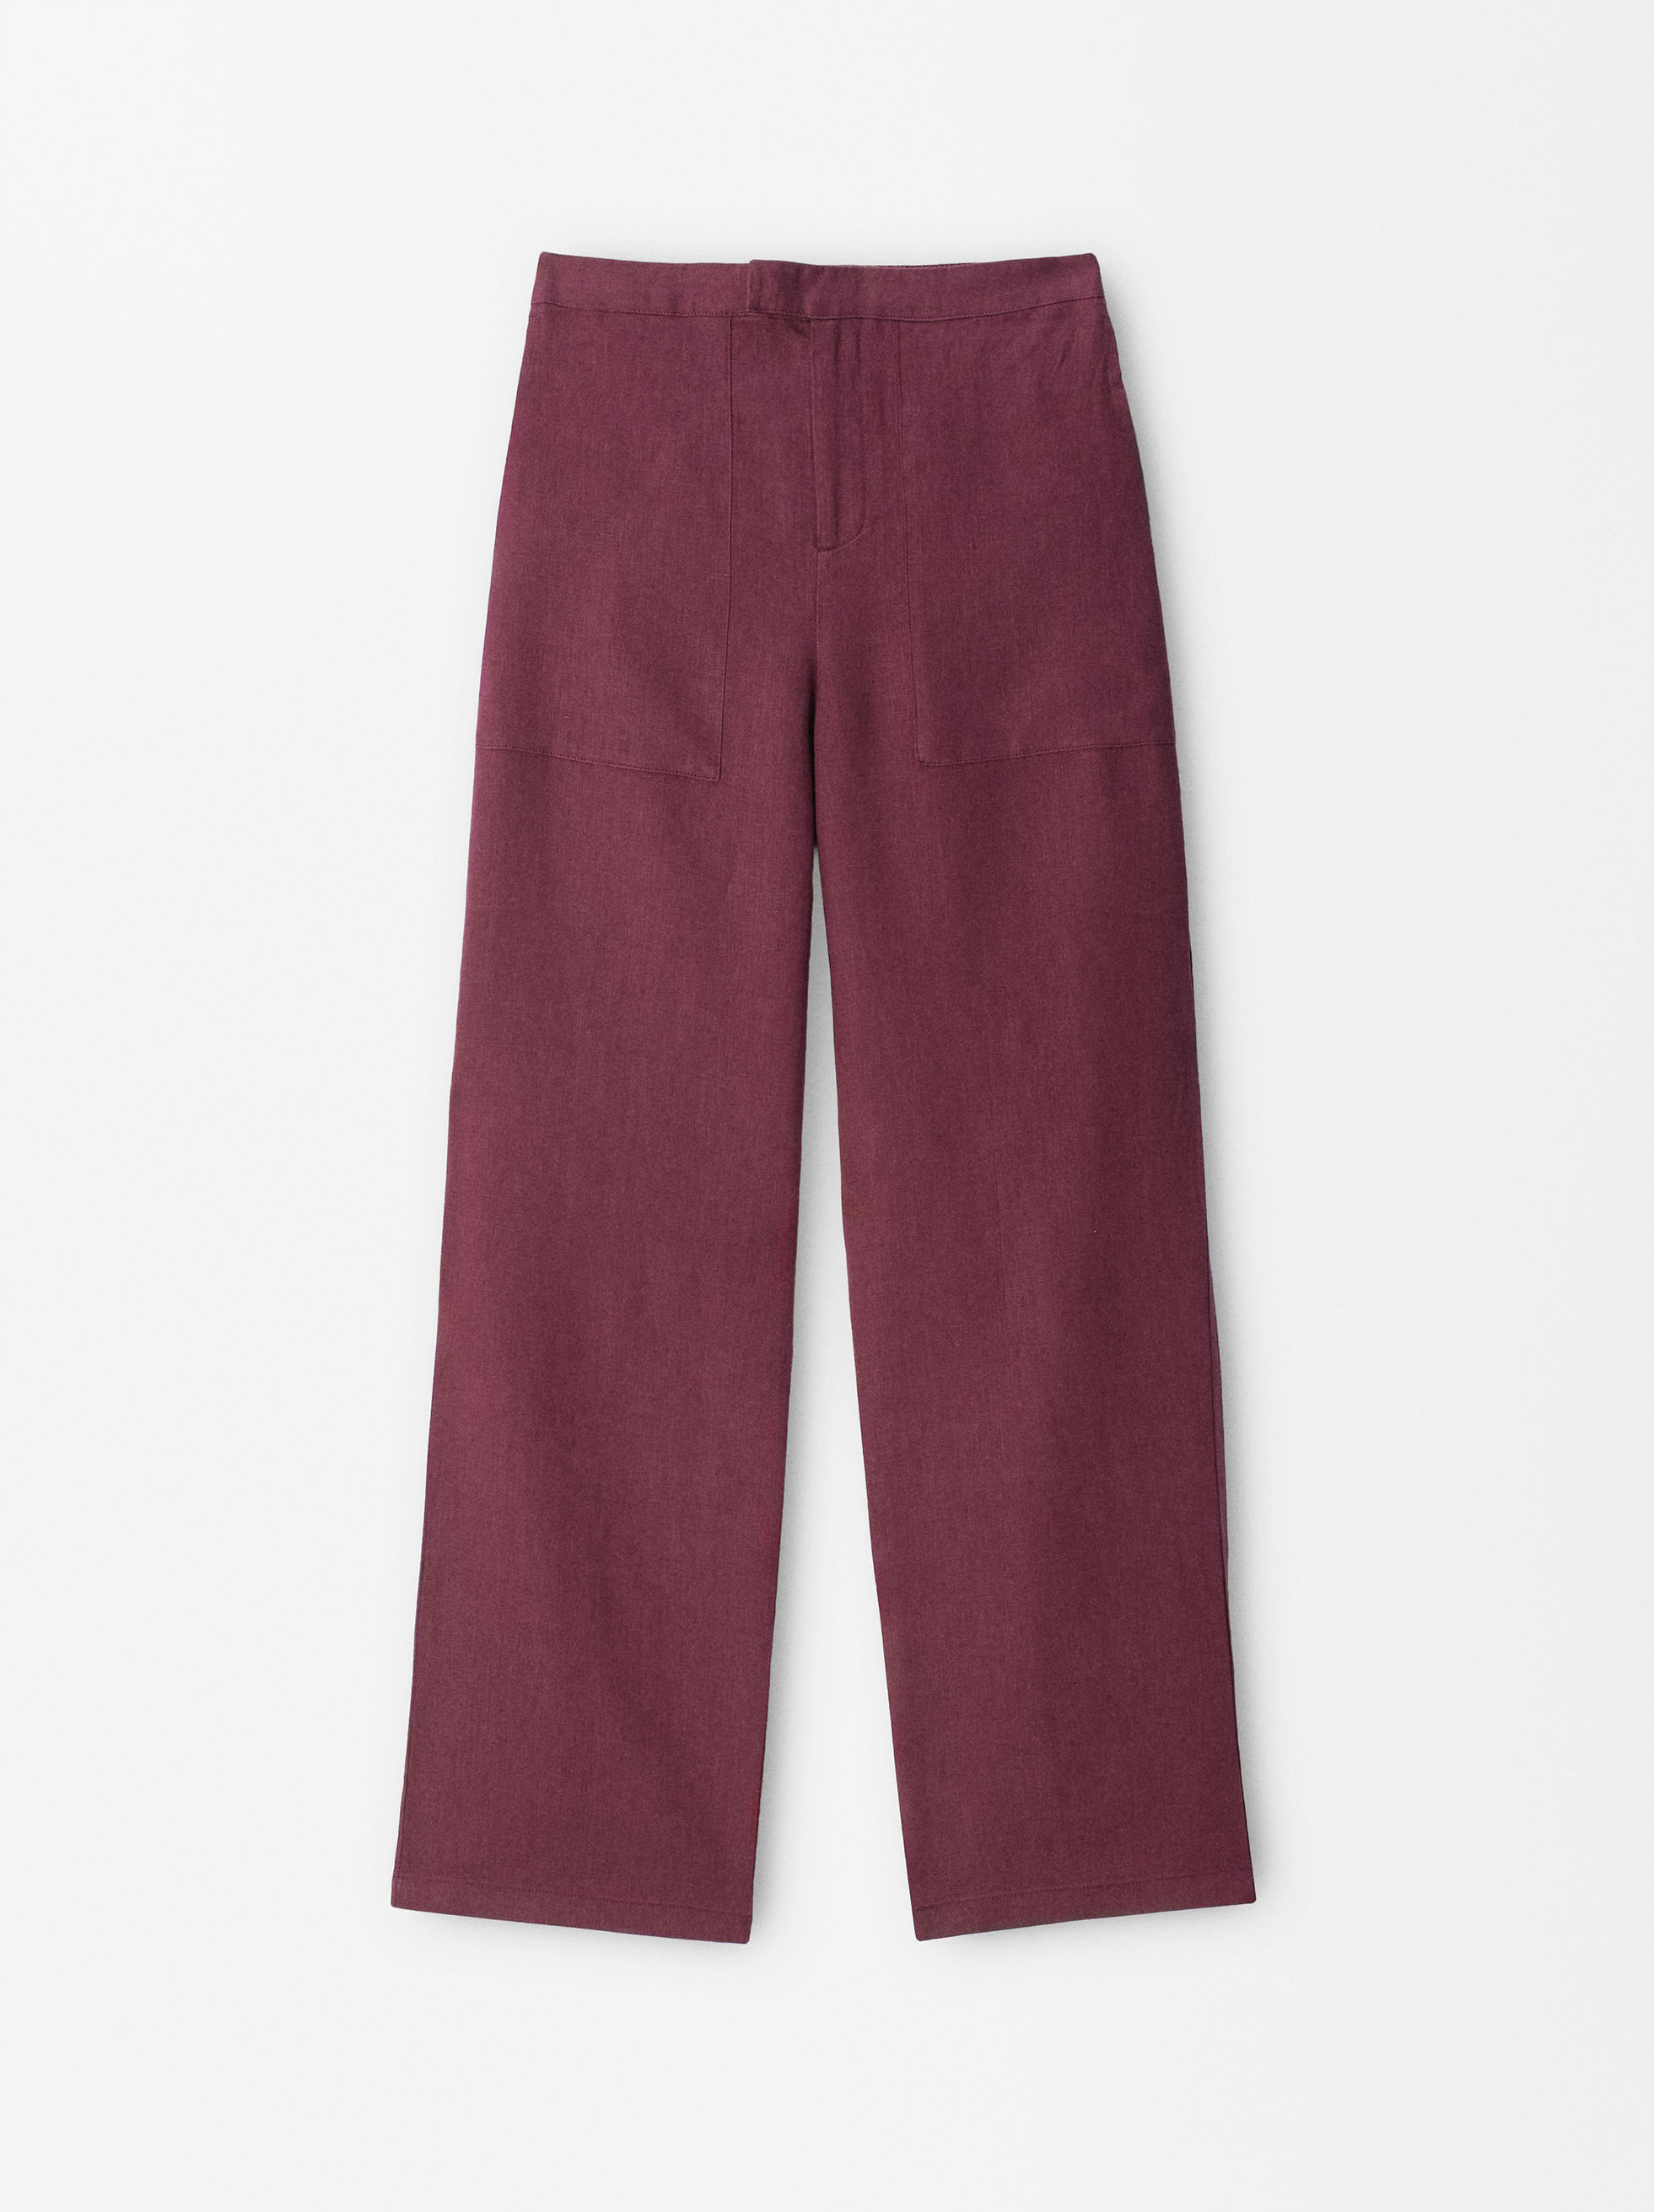 100% Linen Trousers image number 0.0